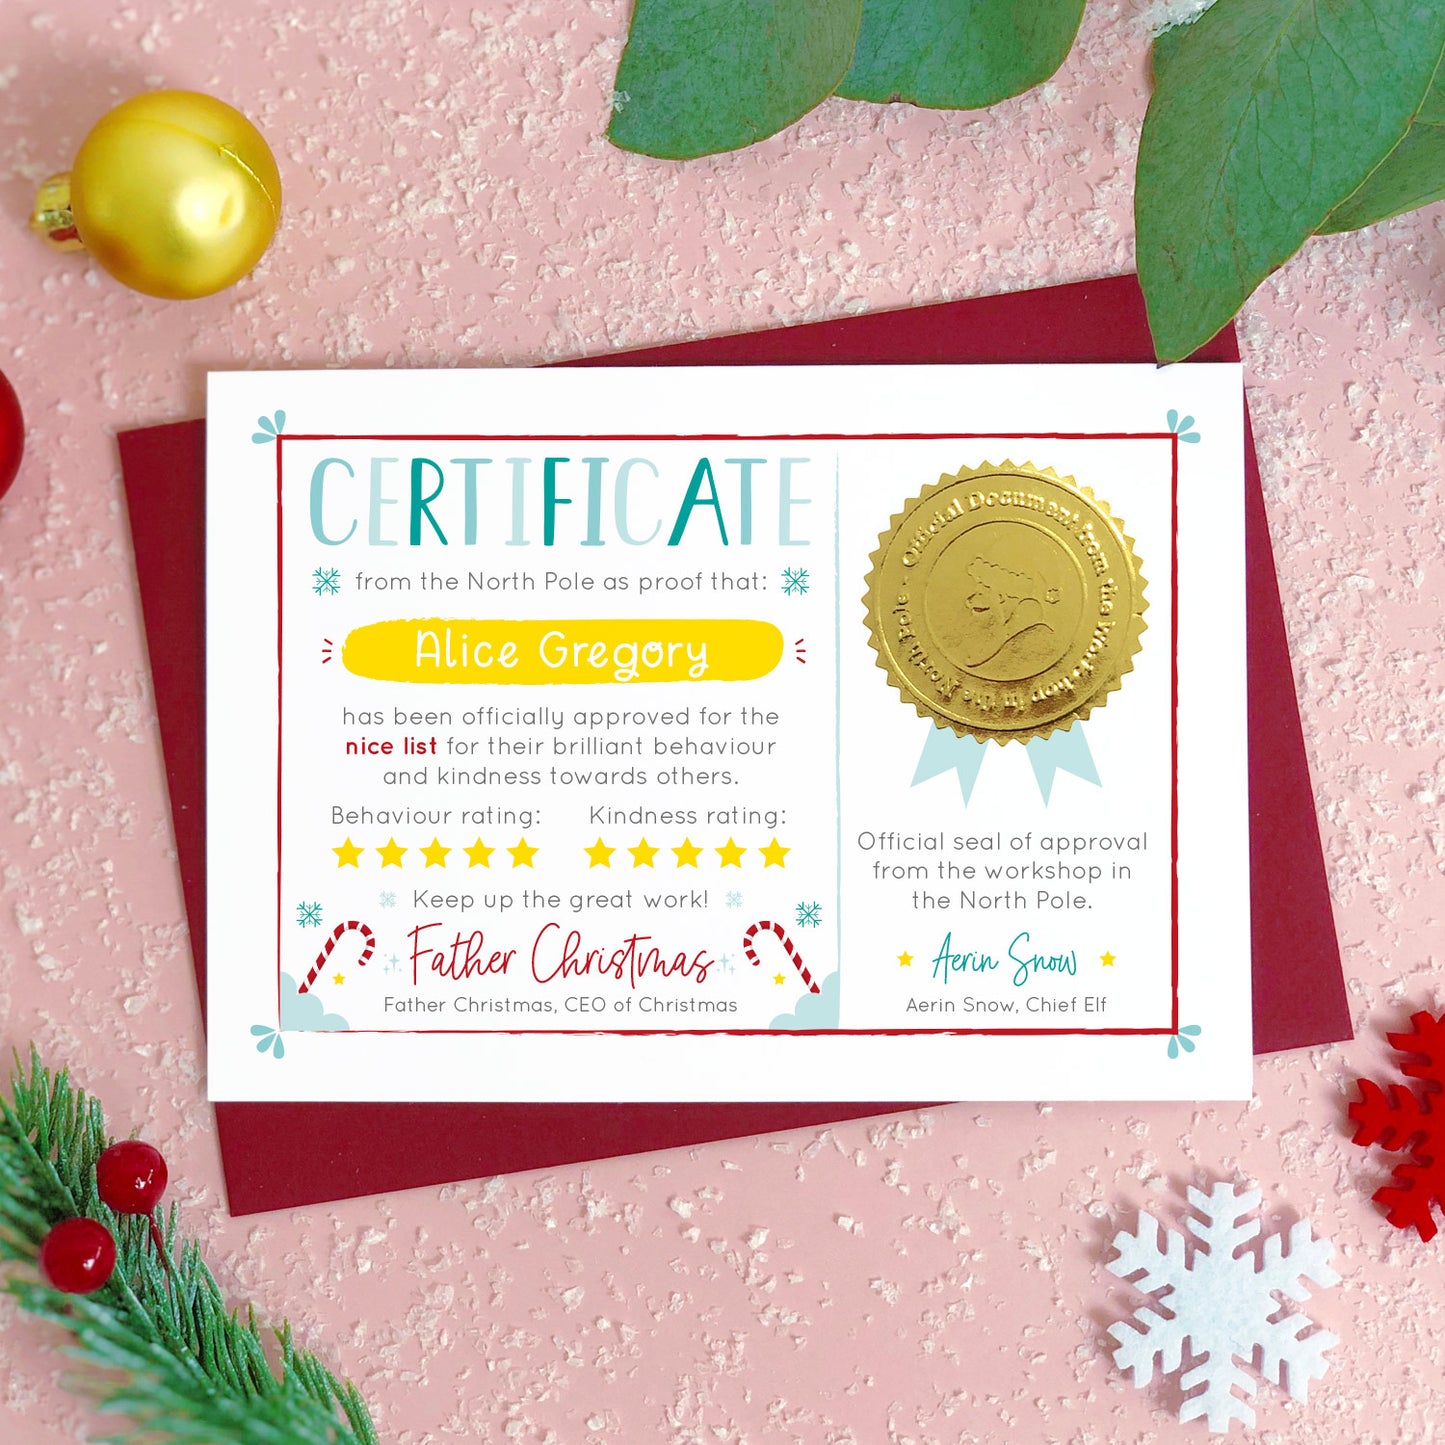 A personalised nice list certificate card from Father Christmas featuring a shiny gold seal, and signatures from santa and his chief elf. Shot on a pink background with baubles, snowflakes and Christmas foliage.